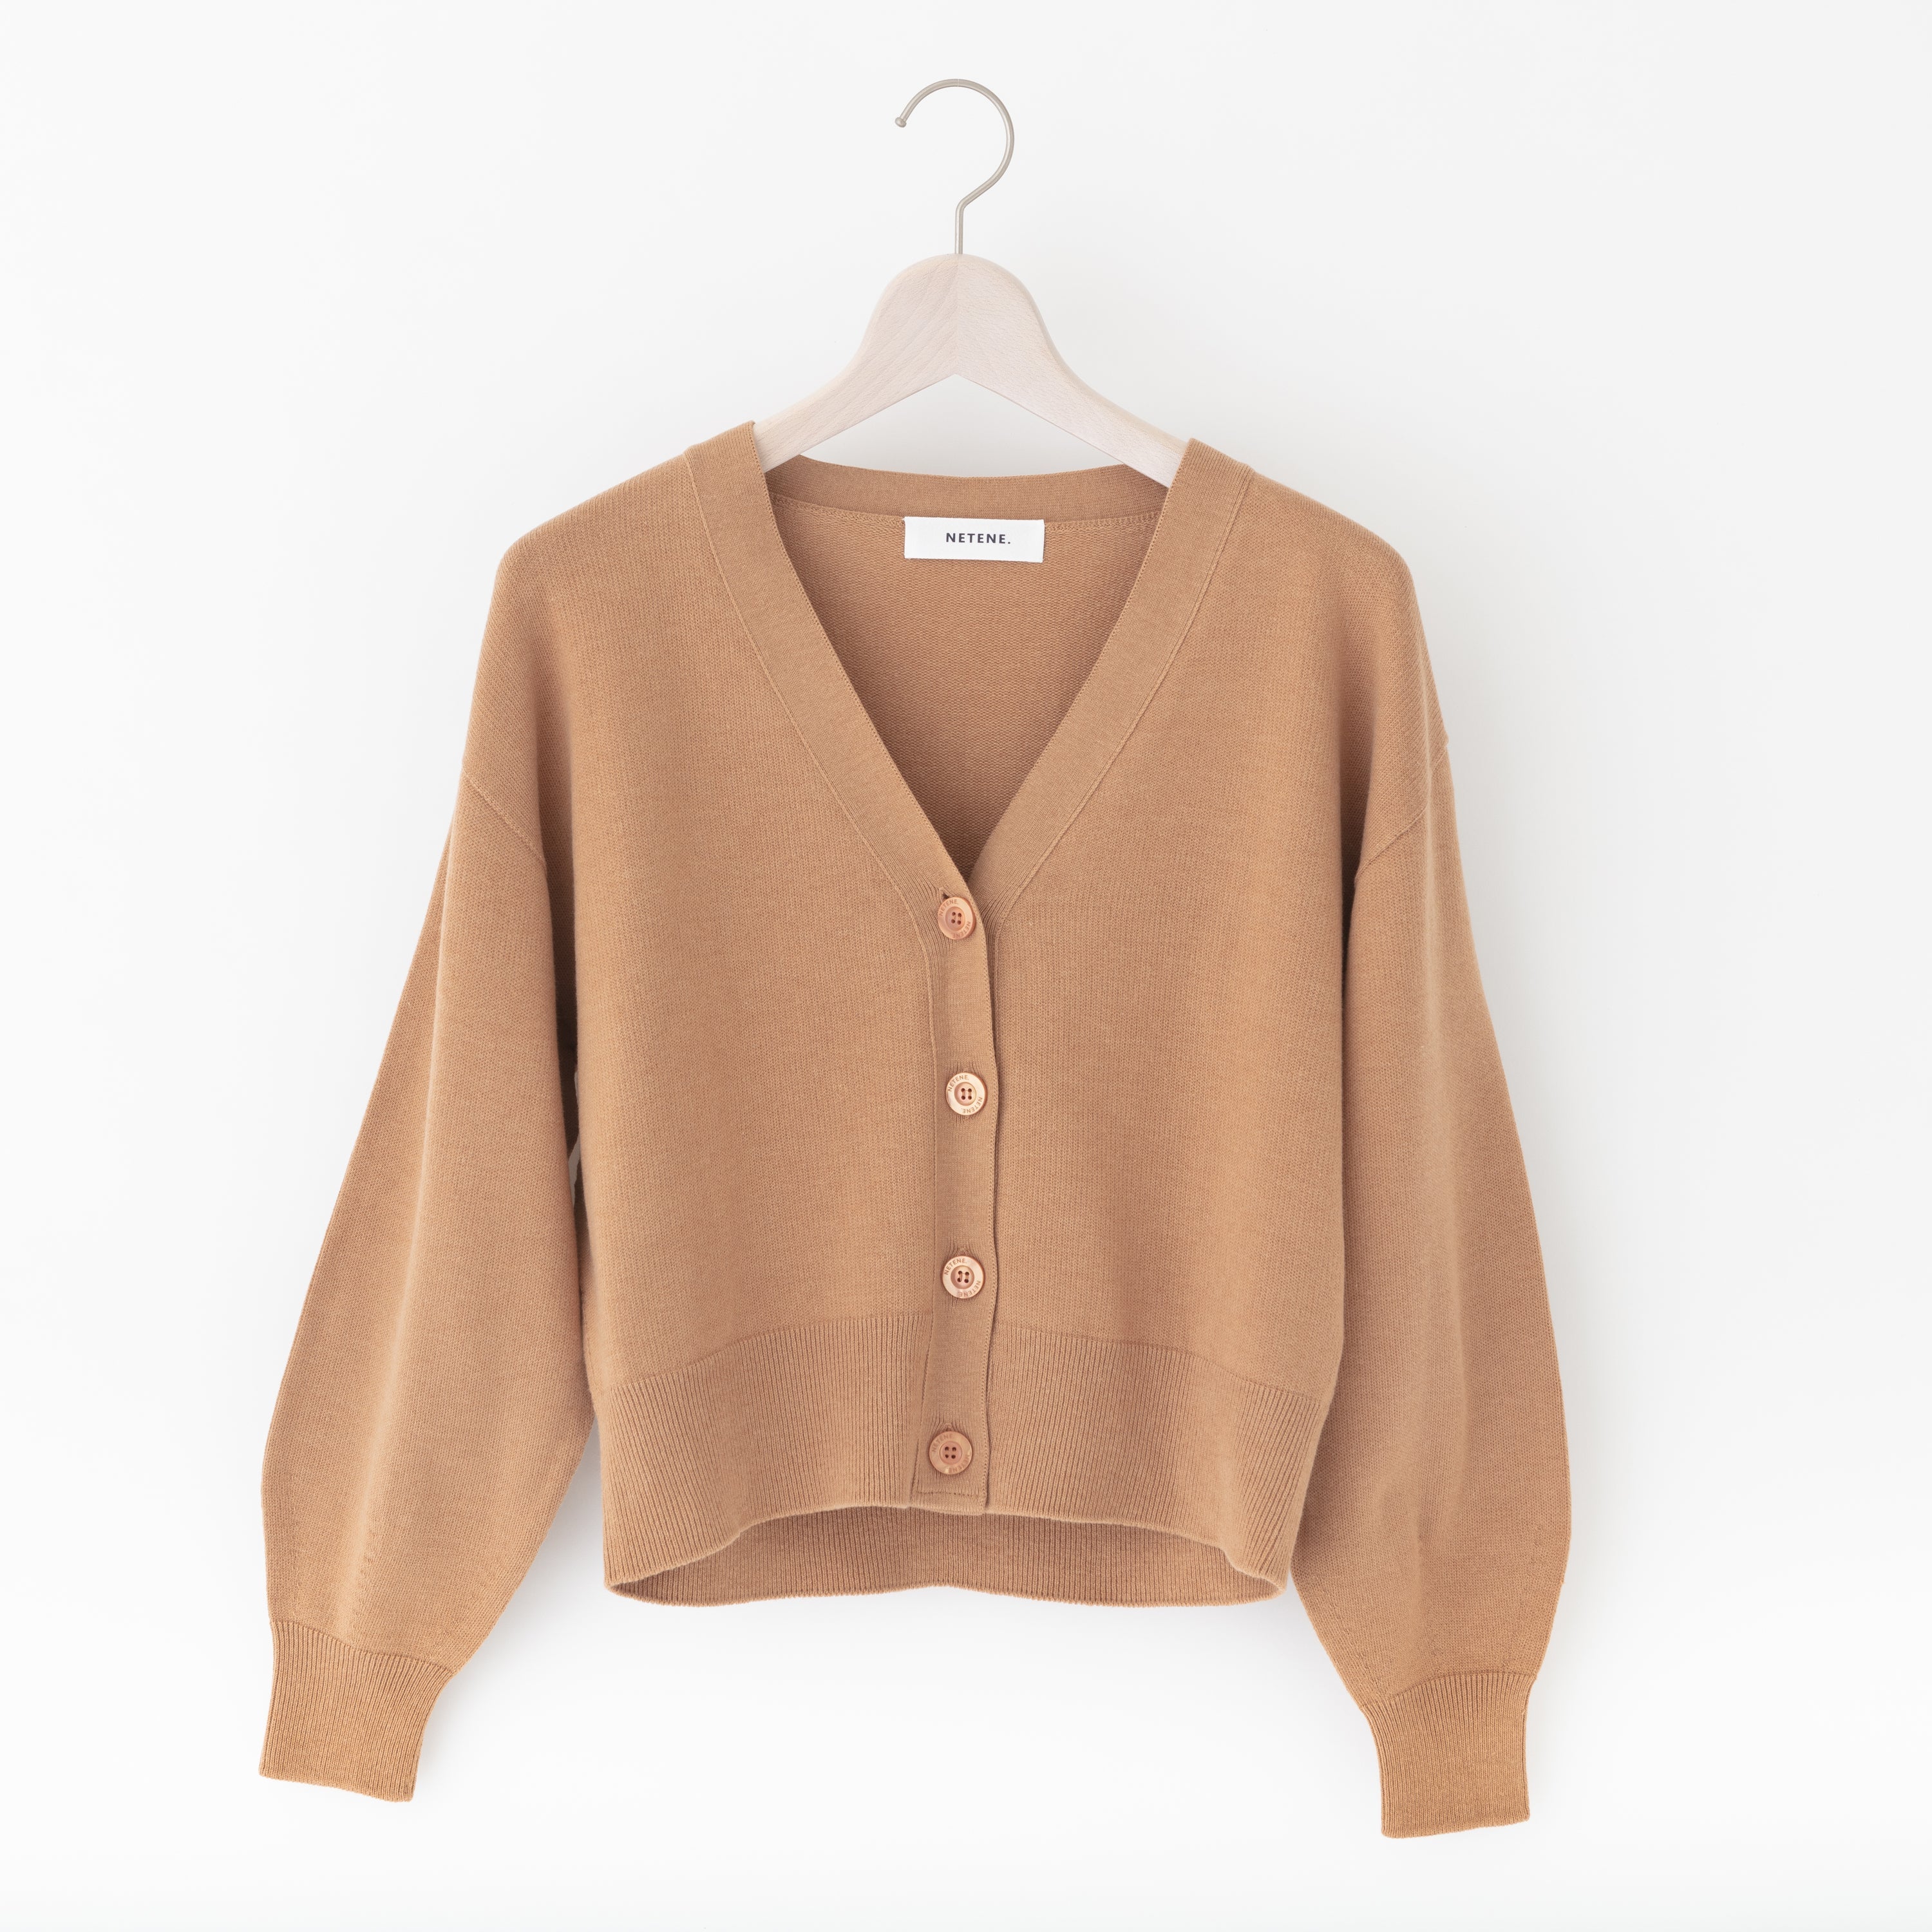 Feel Smooth Knitted Wide Cardigan フィールスムース ニットワイドカーディガン